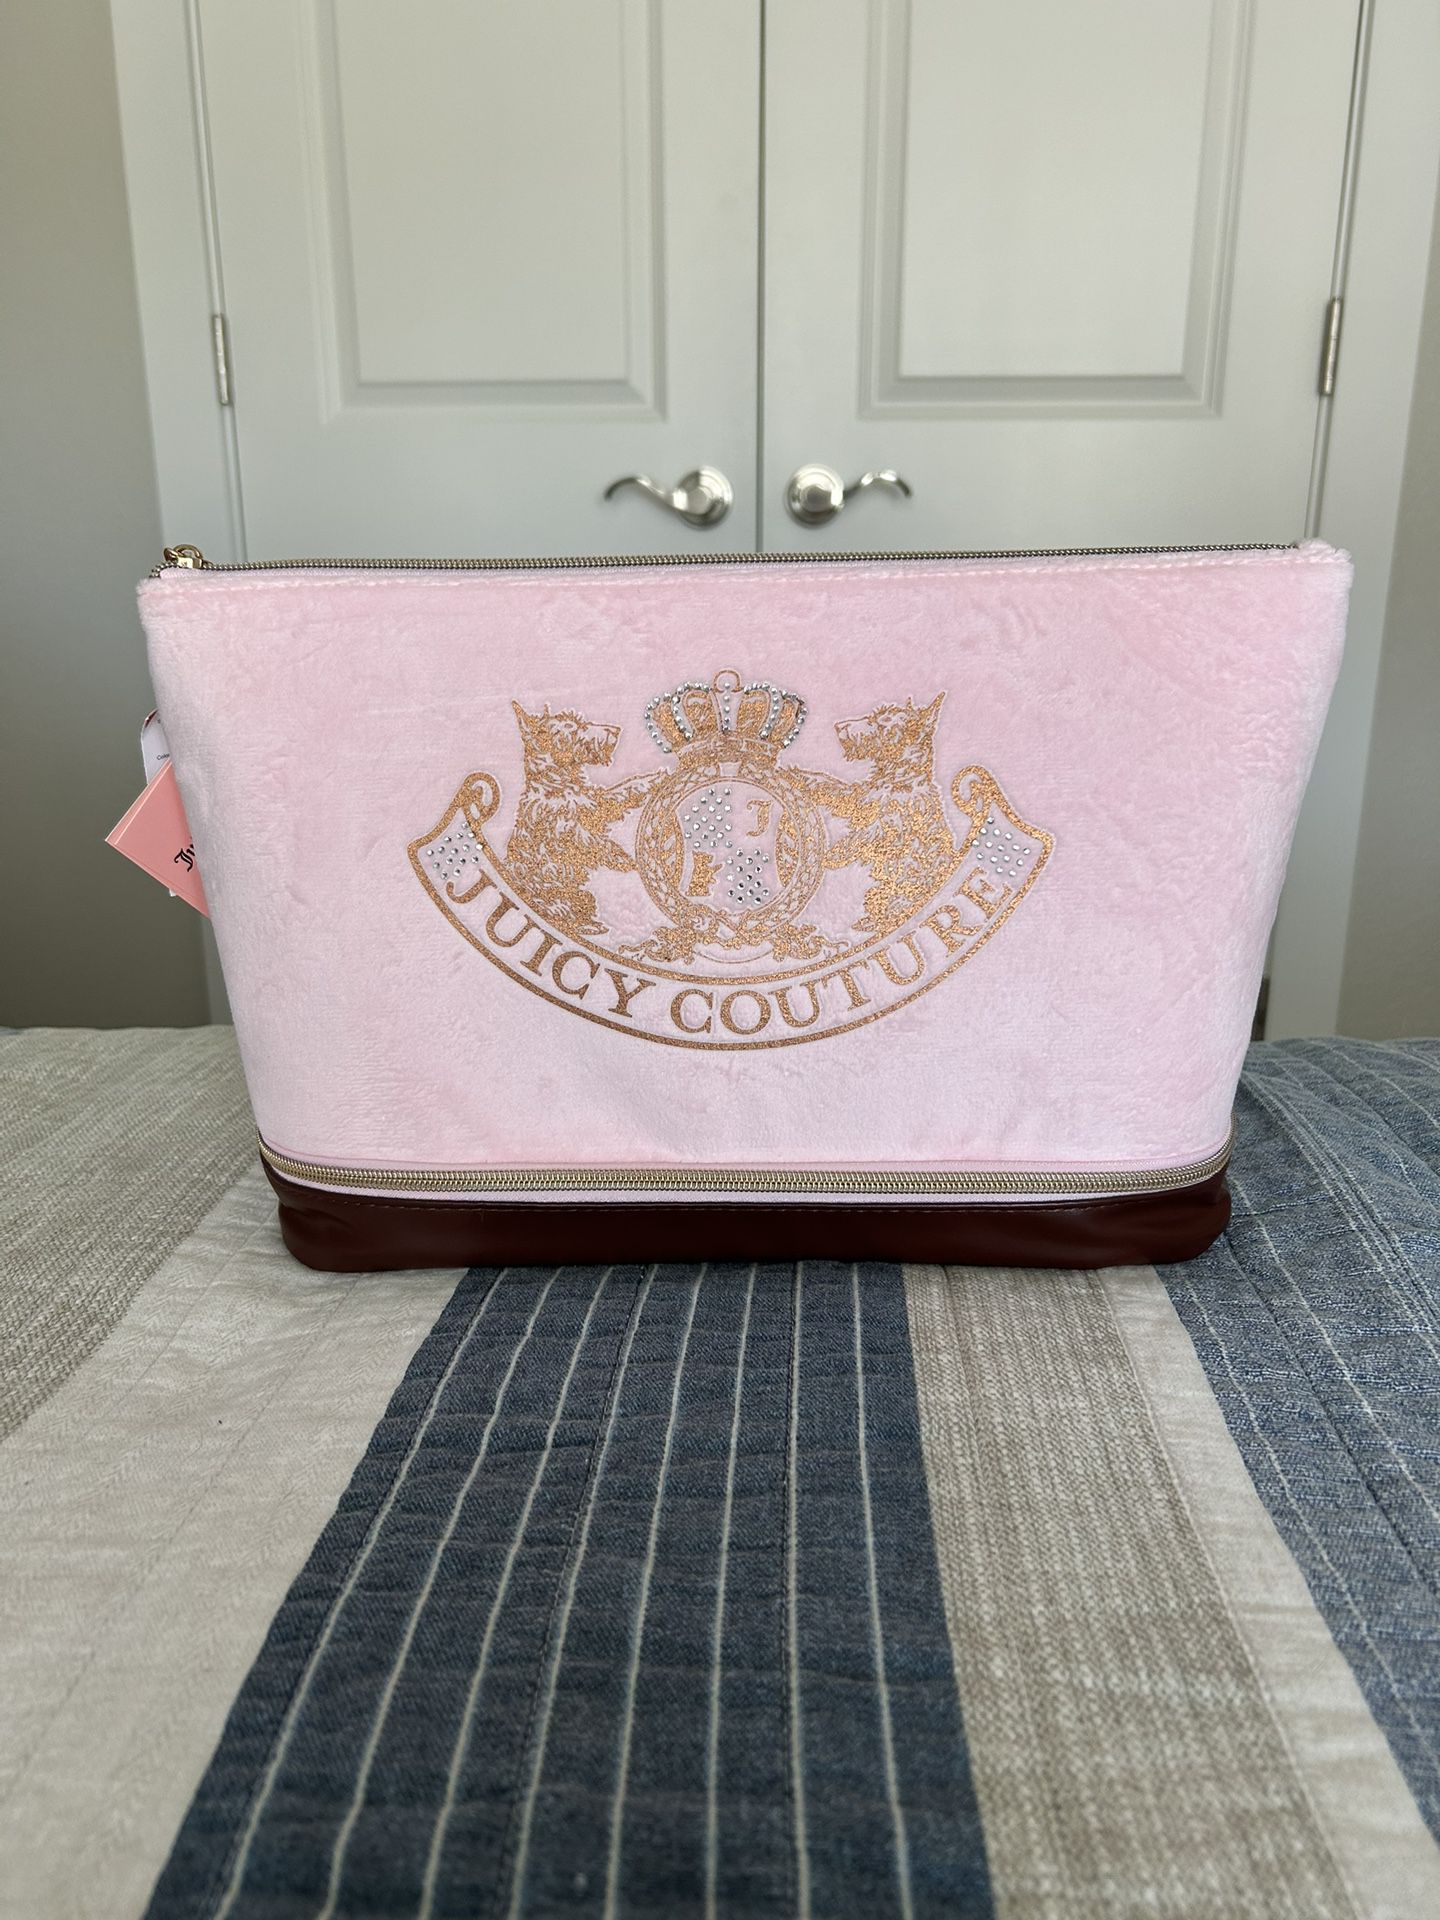 Juicy Couture Velour Pink And Brown X-Large Travel Makeup Bag New With Tags